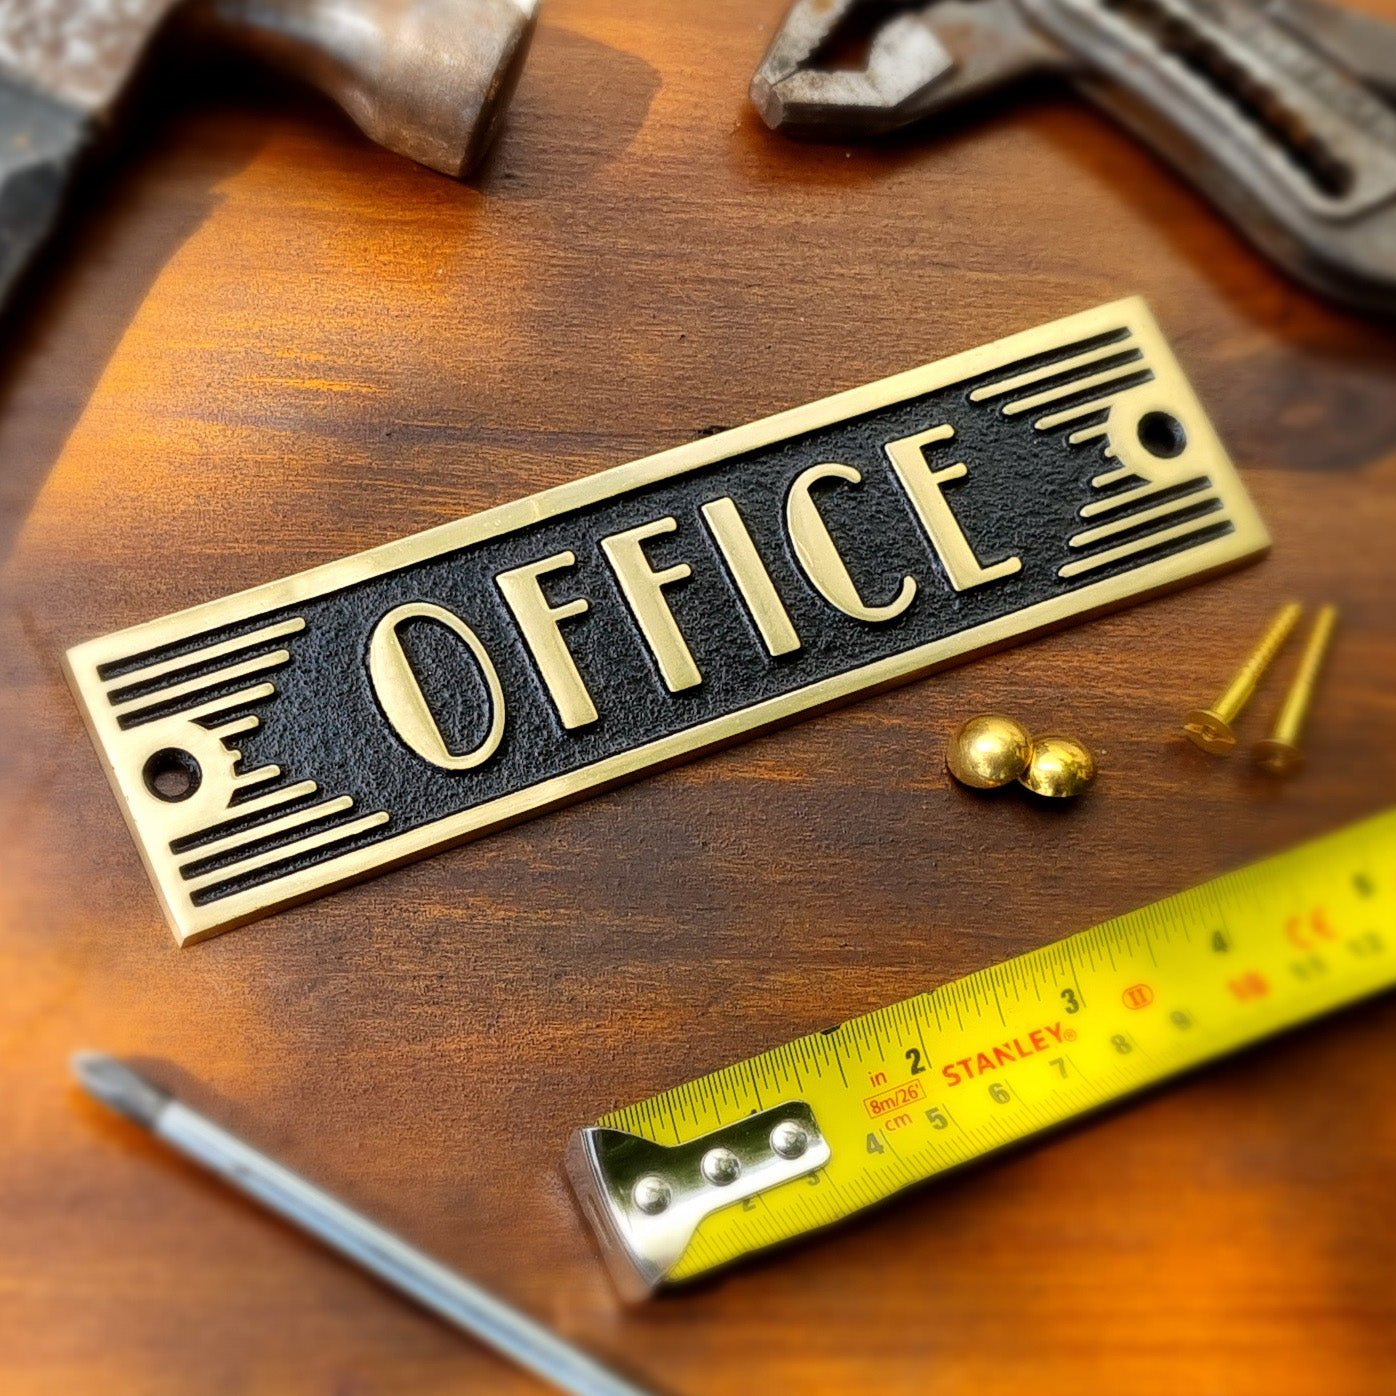 Art Deco 'Office' Sign - The Metal Foundry